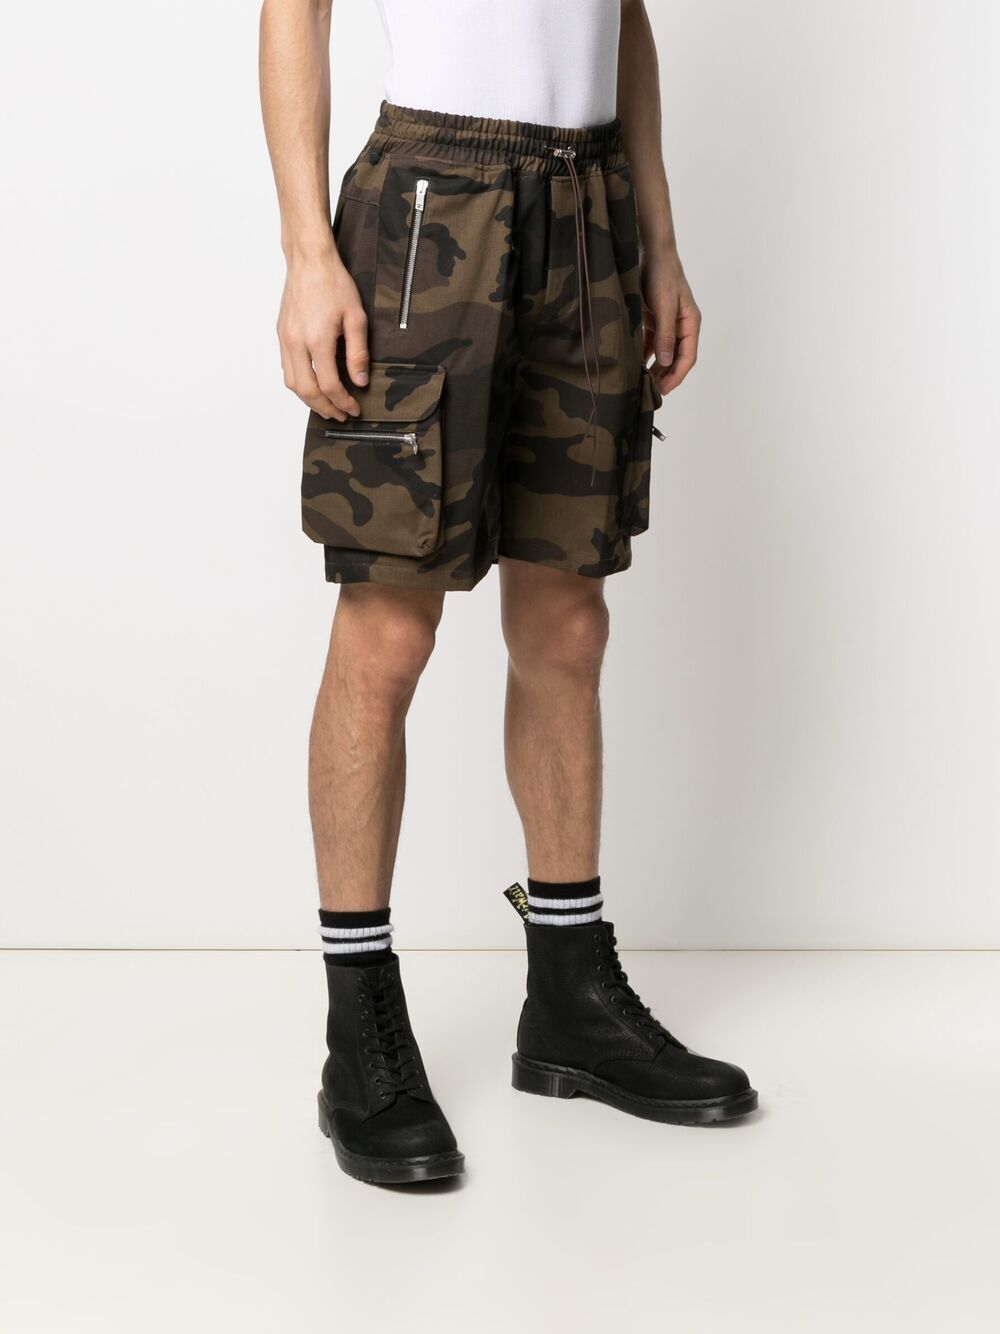 Shop Represent camouflage cargo shorts with Express Delivery - FARFETCH